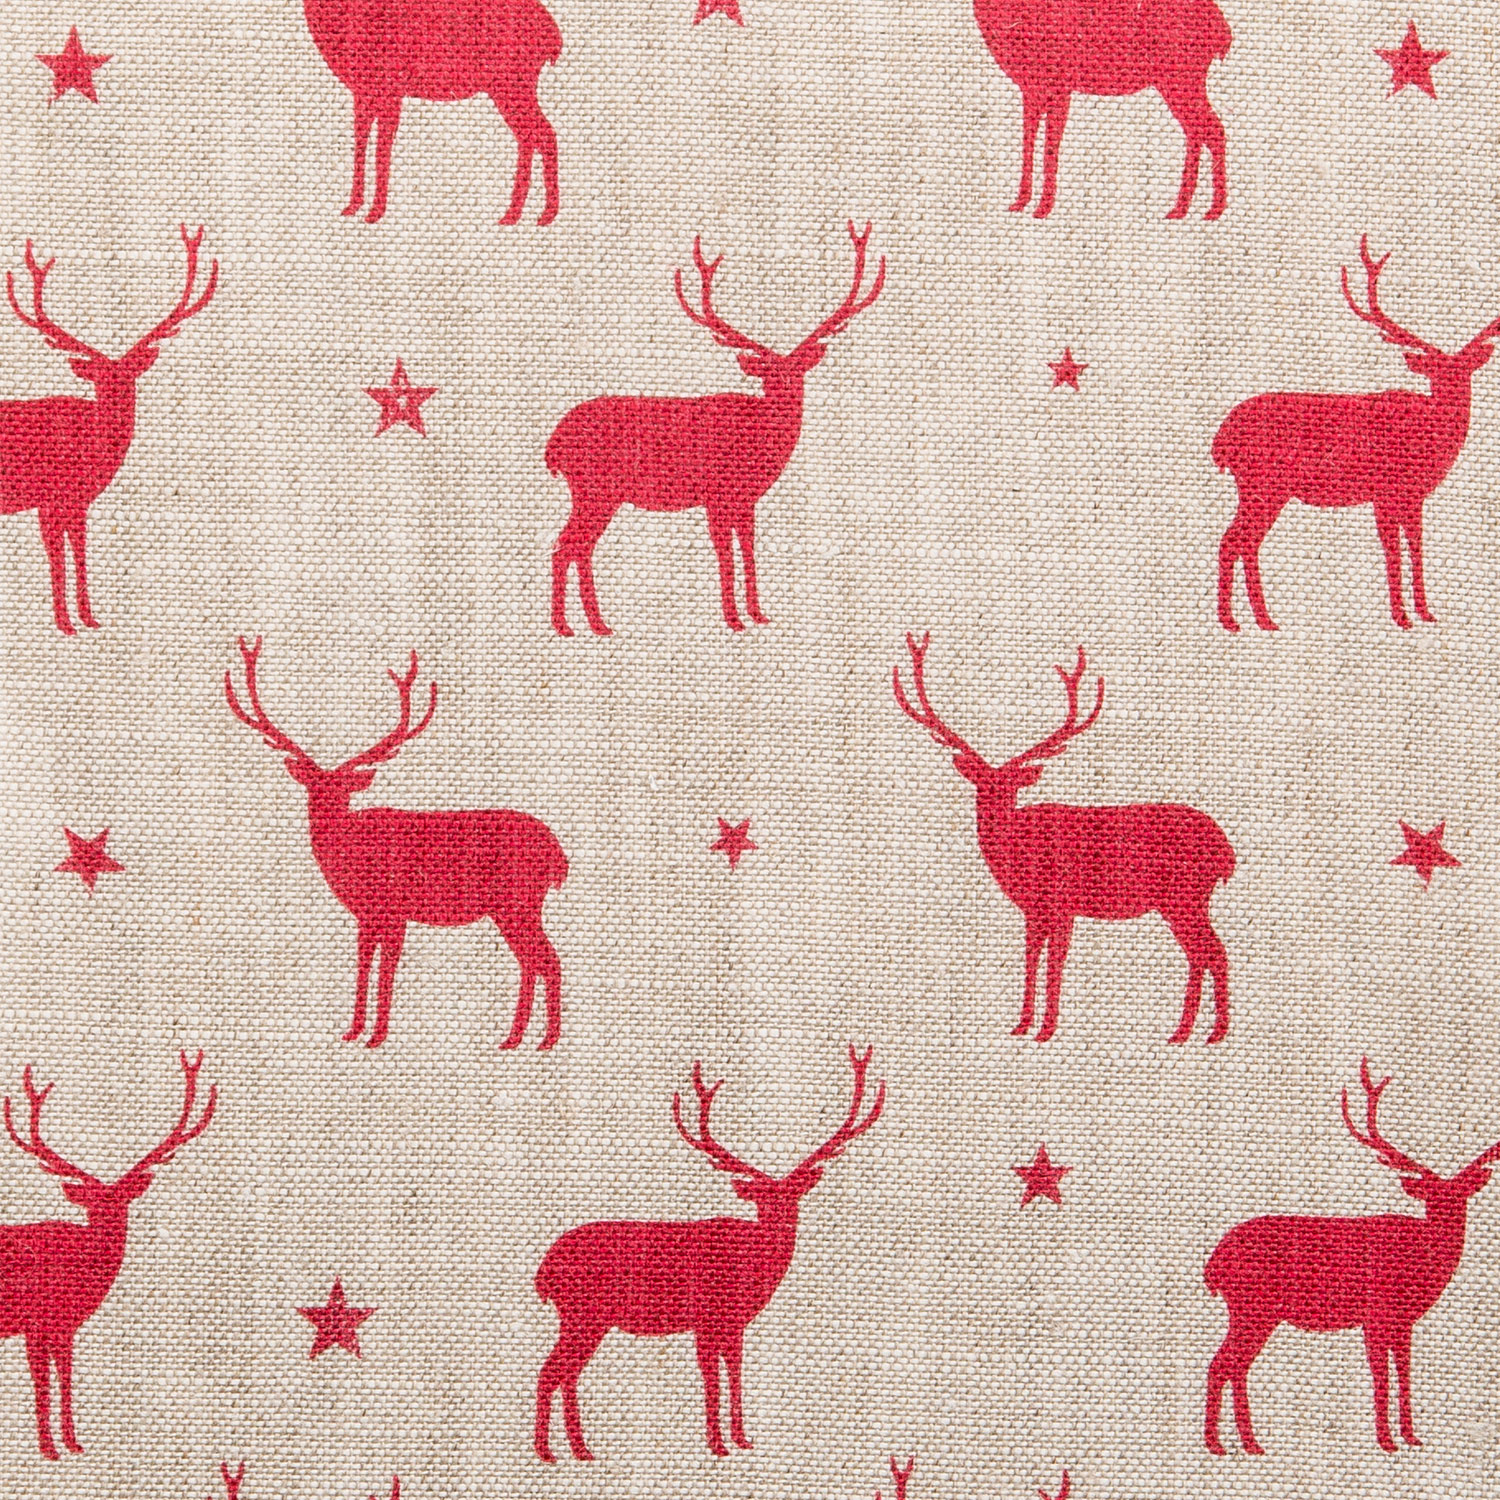 Mini Stags, Red on Stone Linen